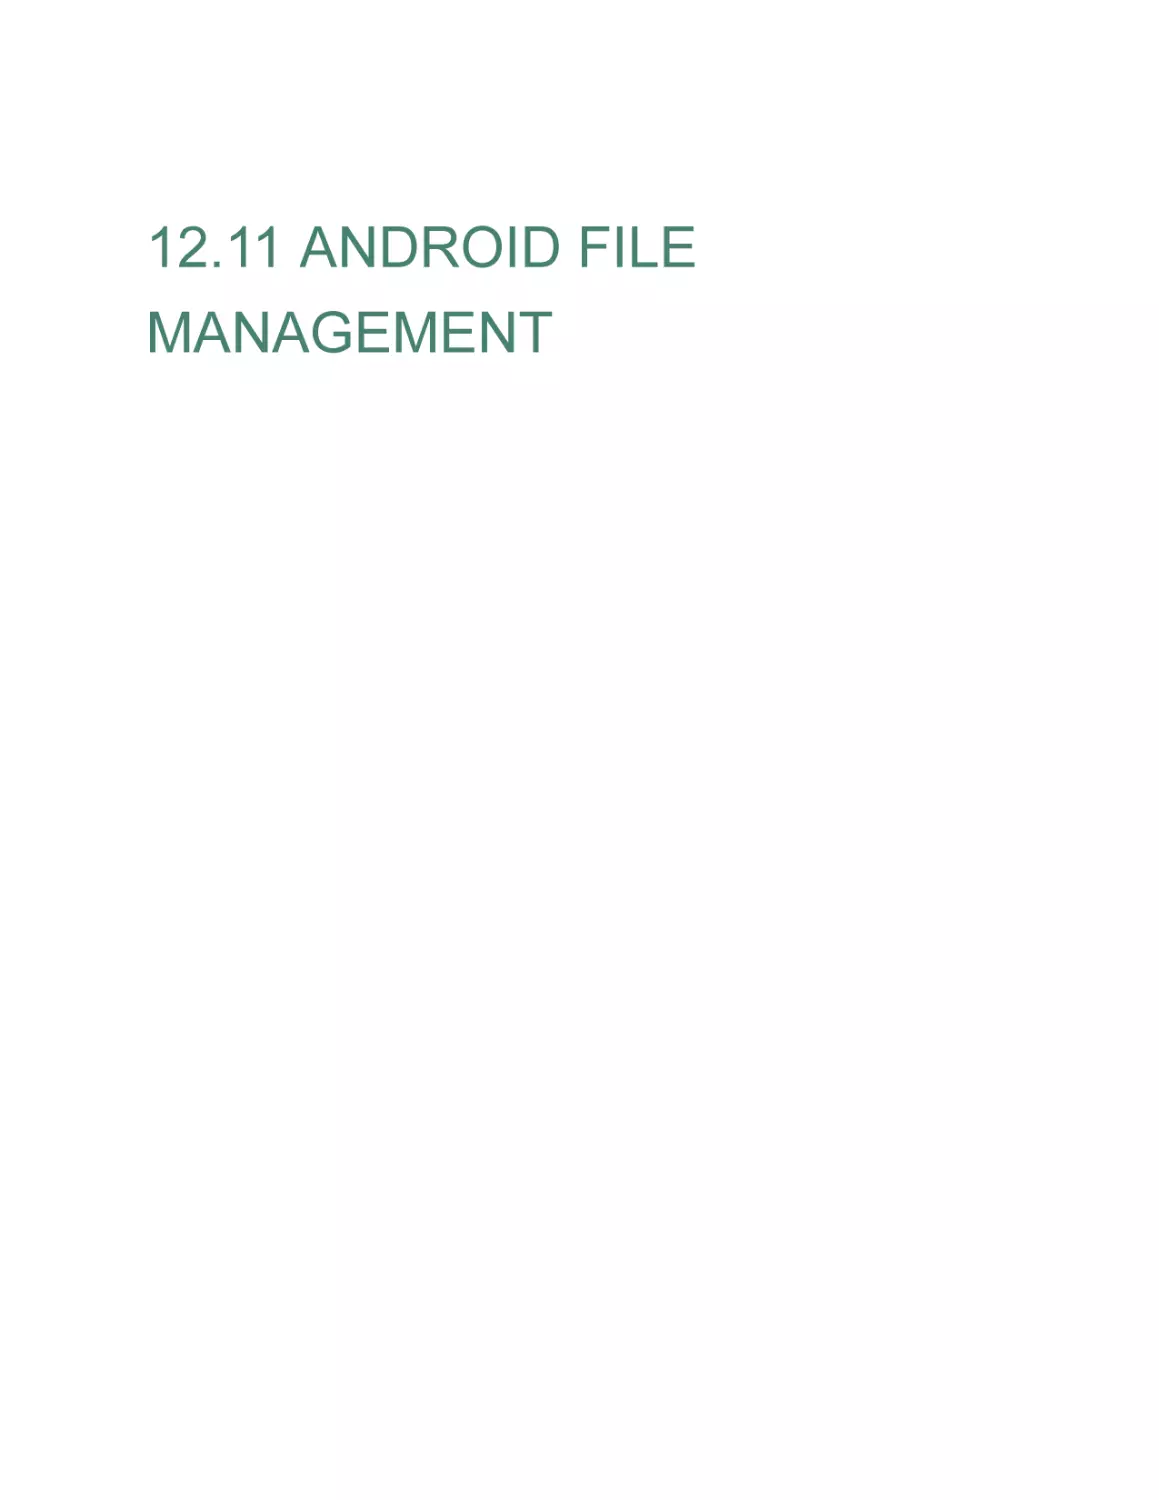 12.11 ANDROID FILE MANAGEMENT